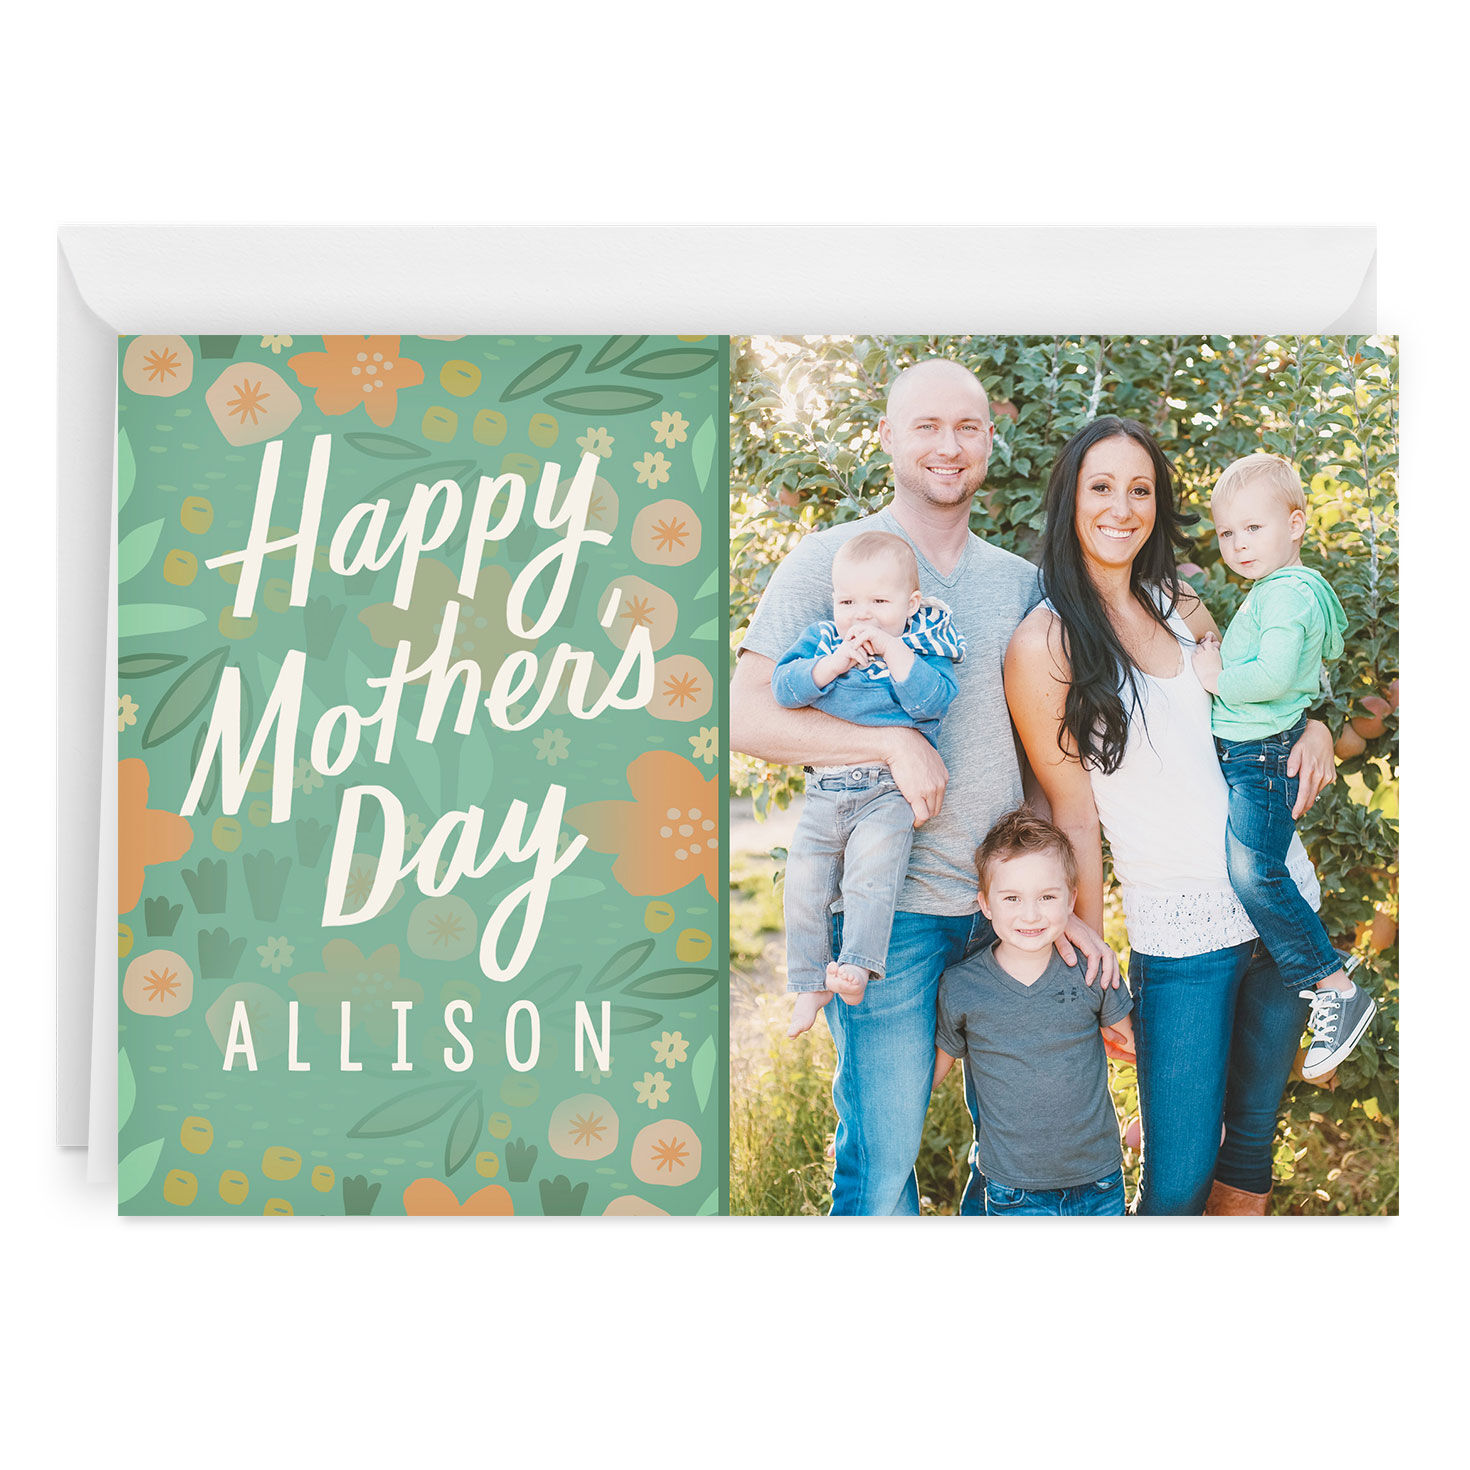 Personalized Floral Print Happy Mother's Day Photo Card for only USD 4.99 | Hallmark